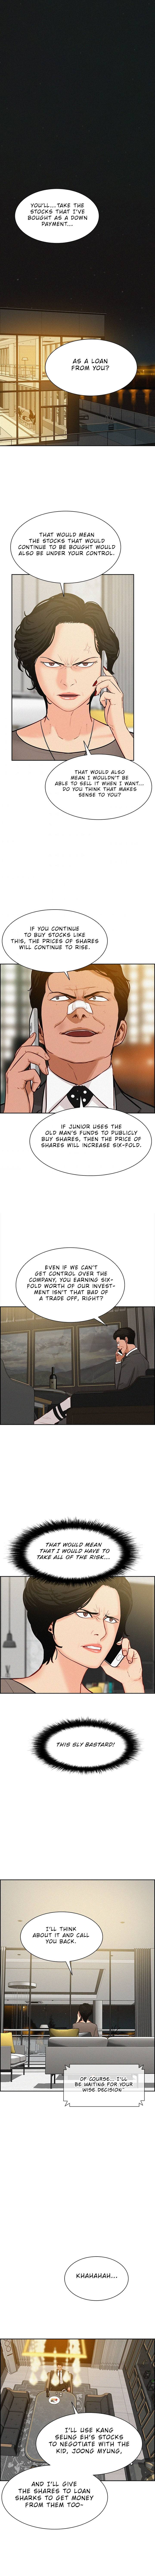 Lord Of Money - Page 2